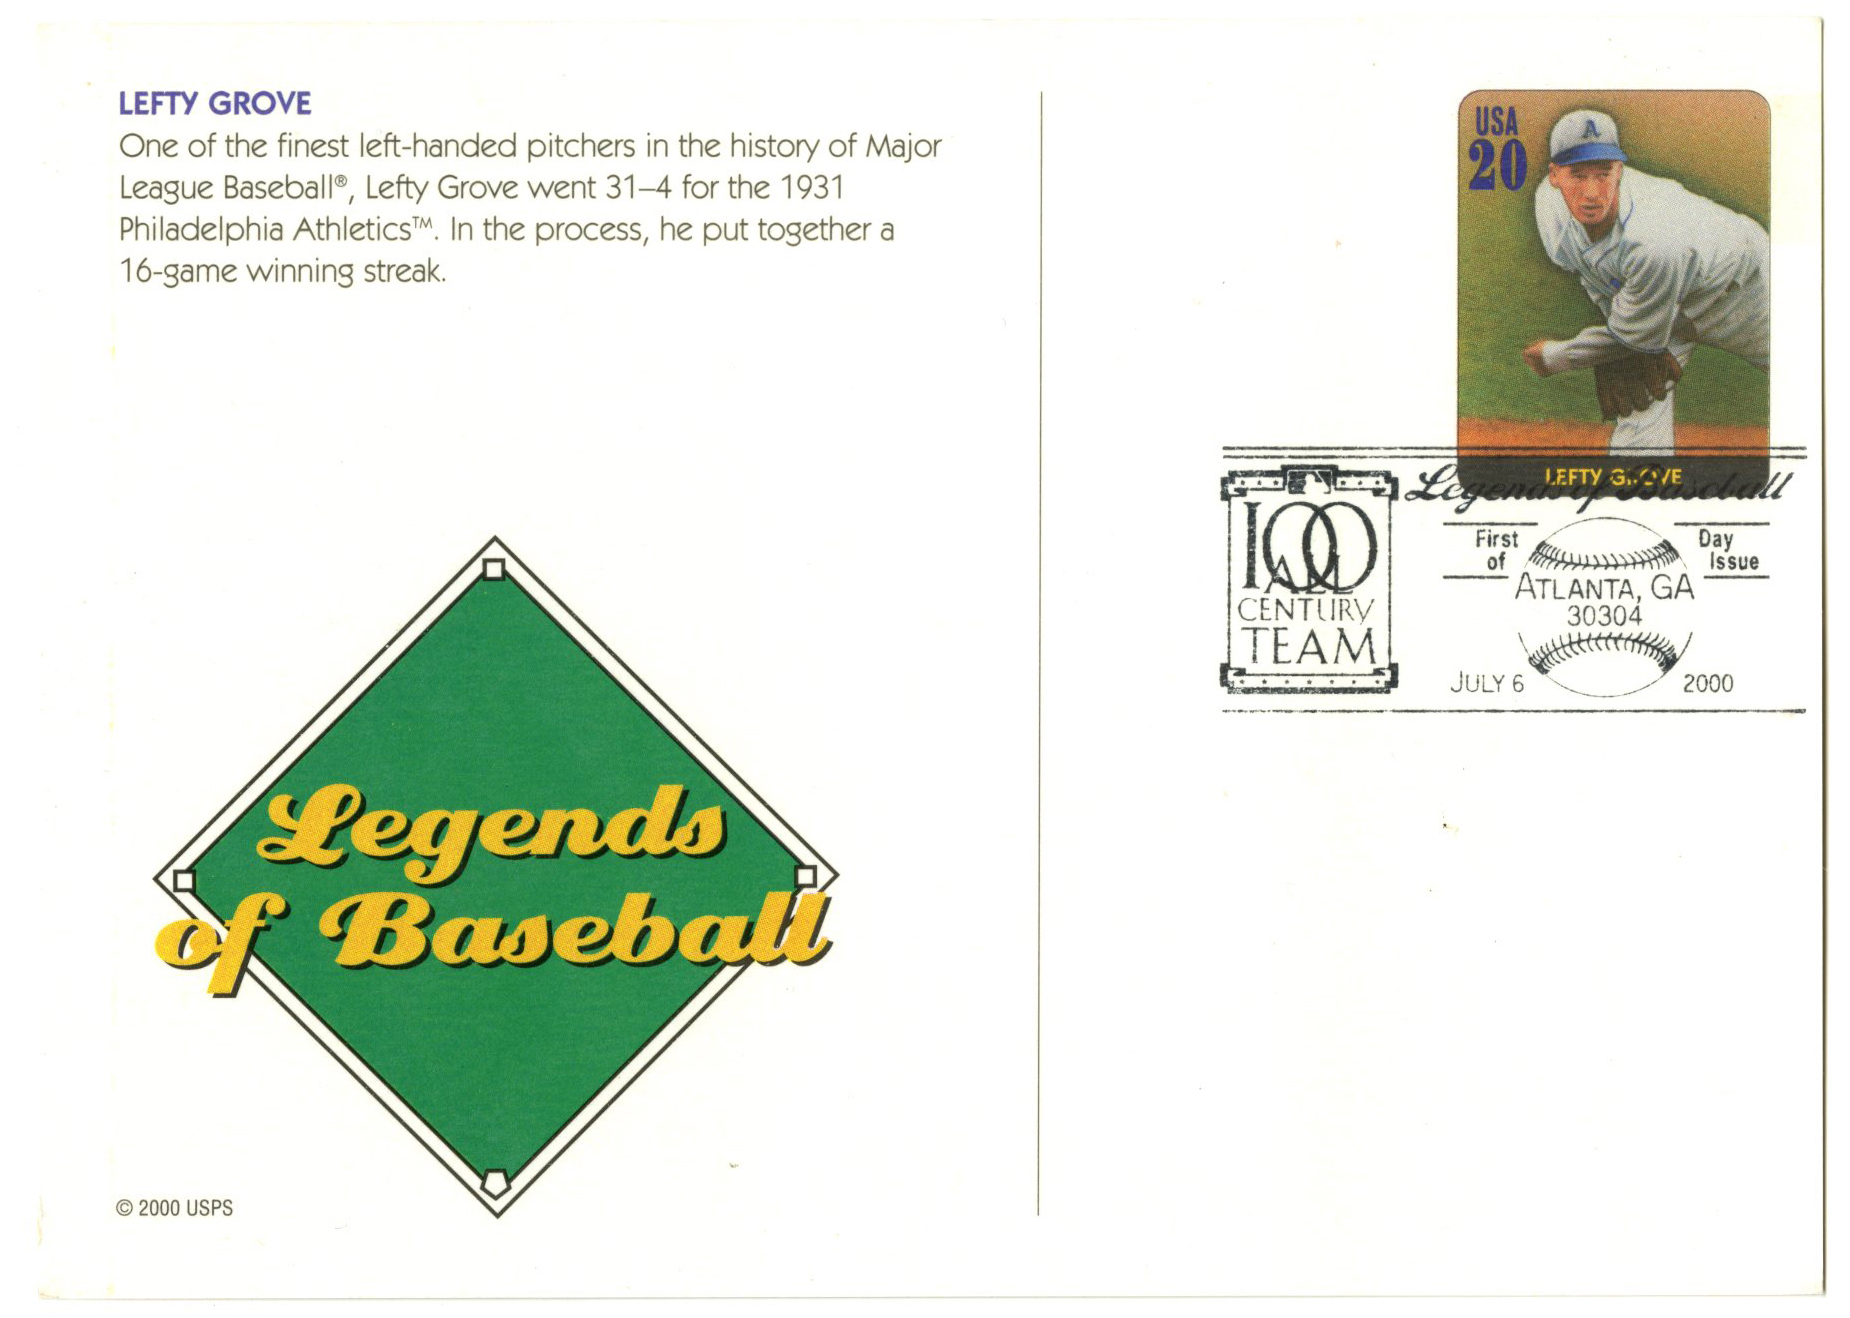 Lefty Grove PC and PSA Stamp Combo FDC